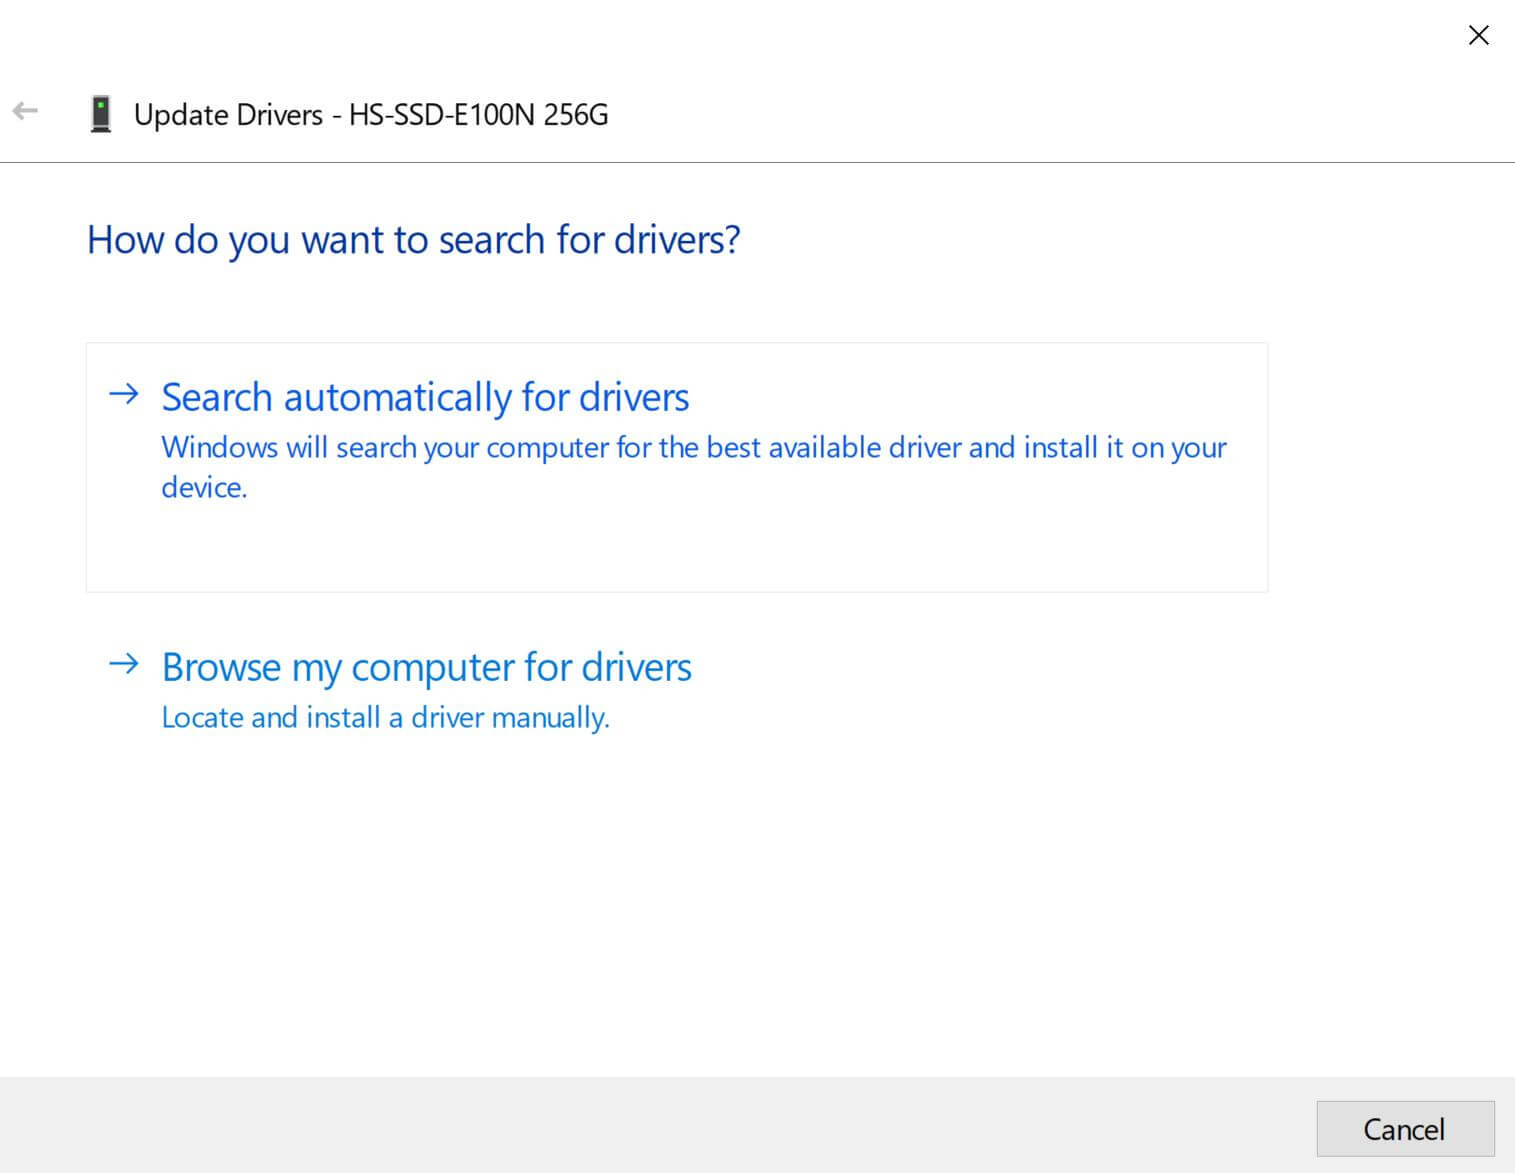 search for drivers automatically